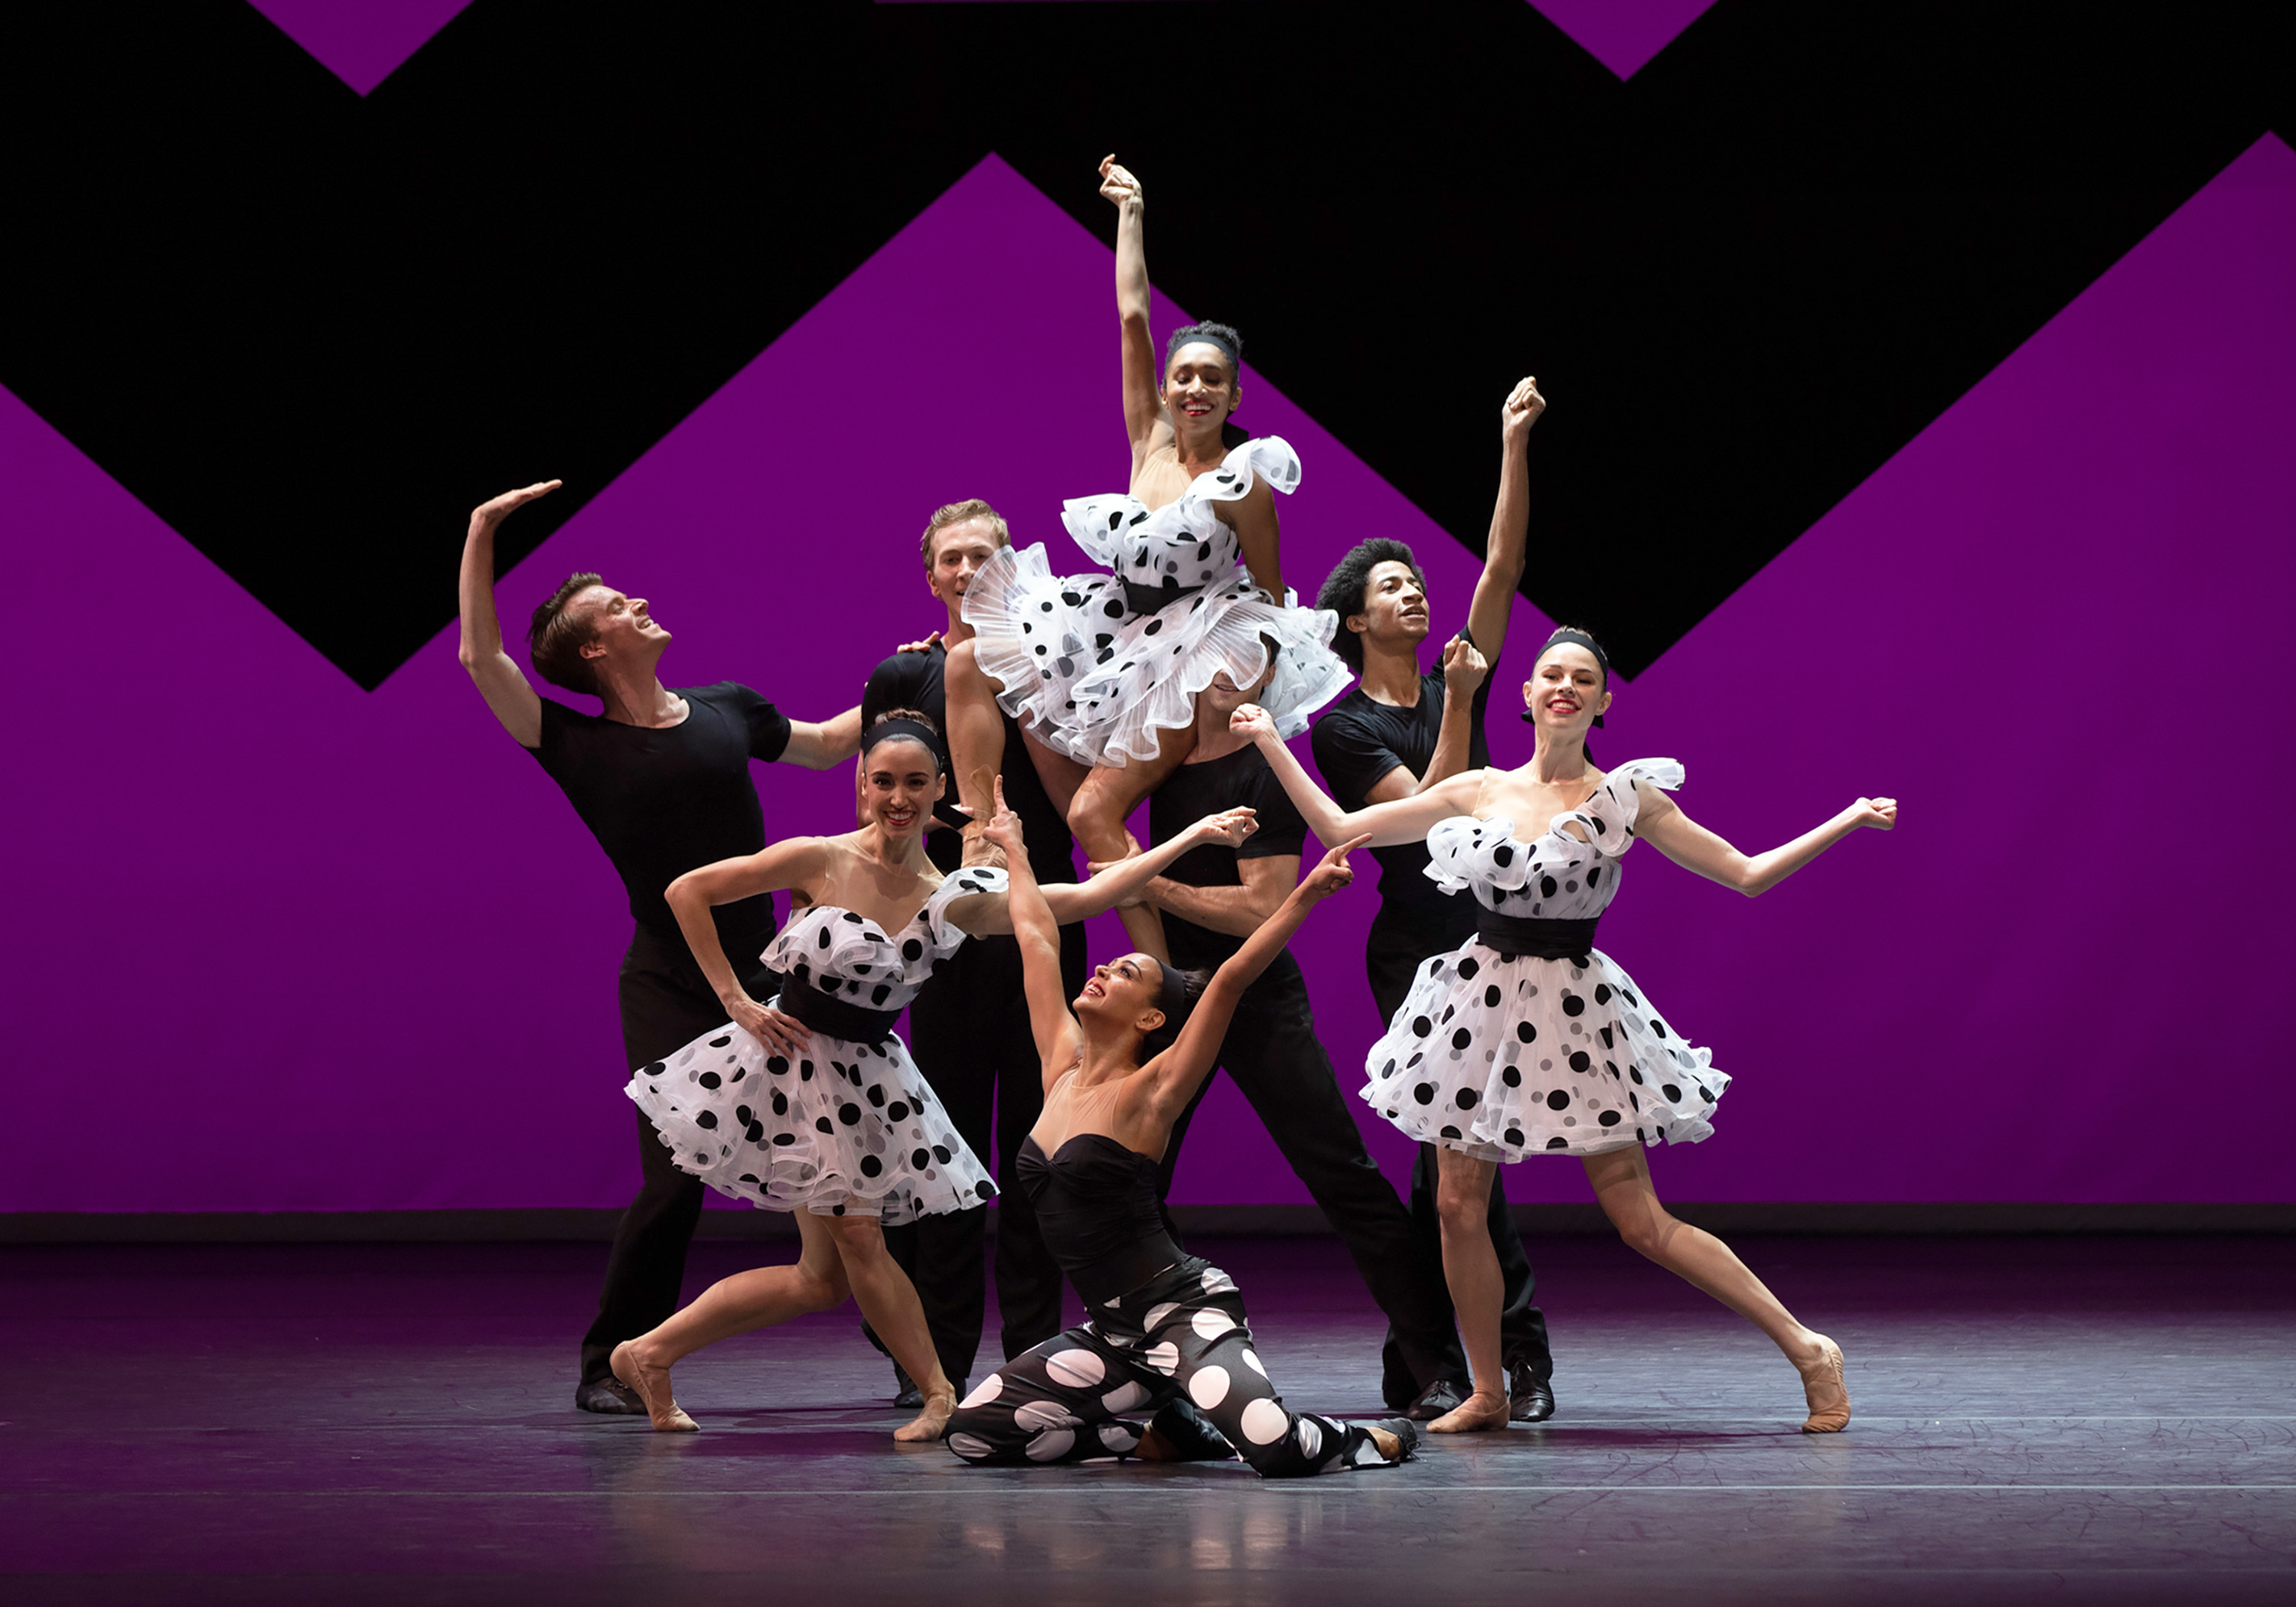 Abu Dhabi Festival Debuts ZigZag In Partnership With The American Ballet Theatre